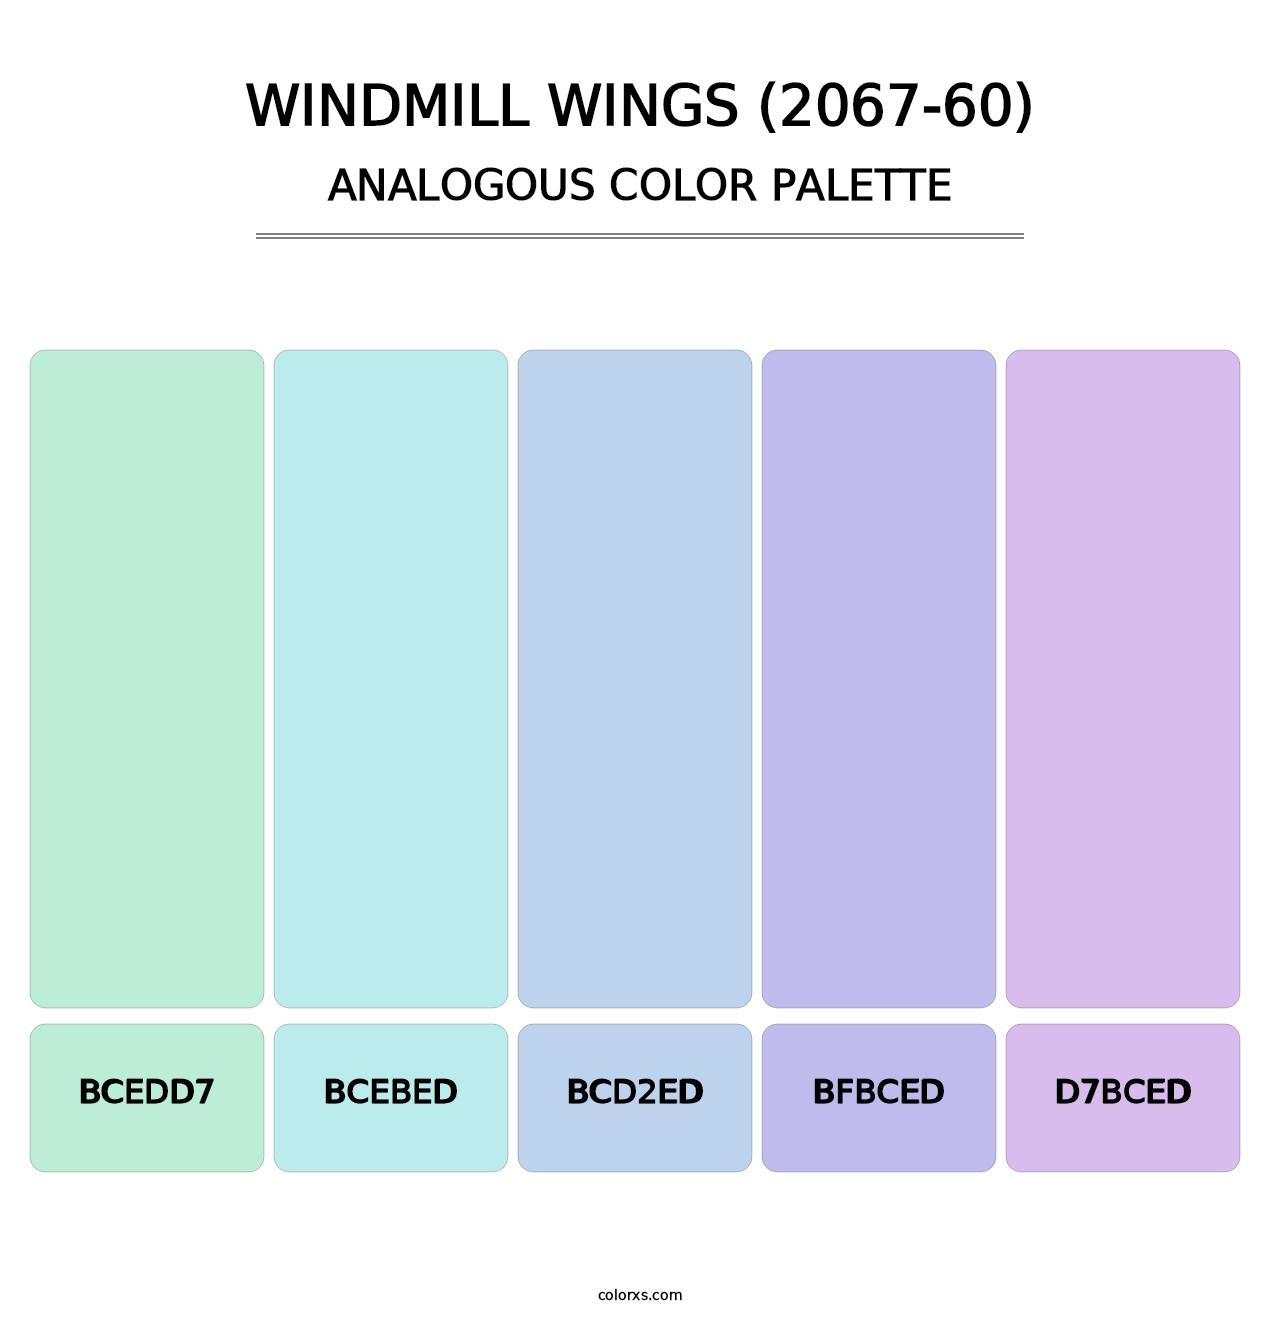 Windmill Wings (2067-60) - Analogous Color Palette